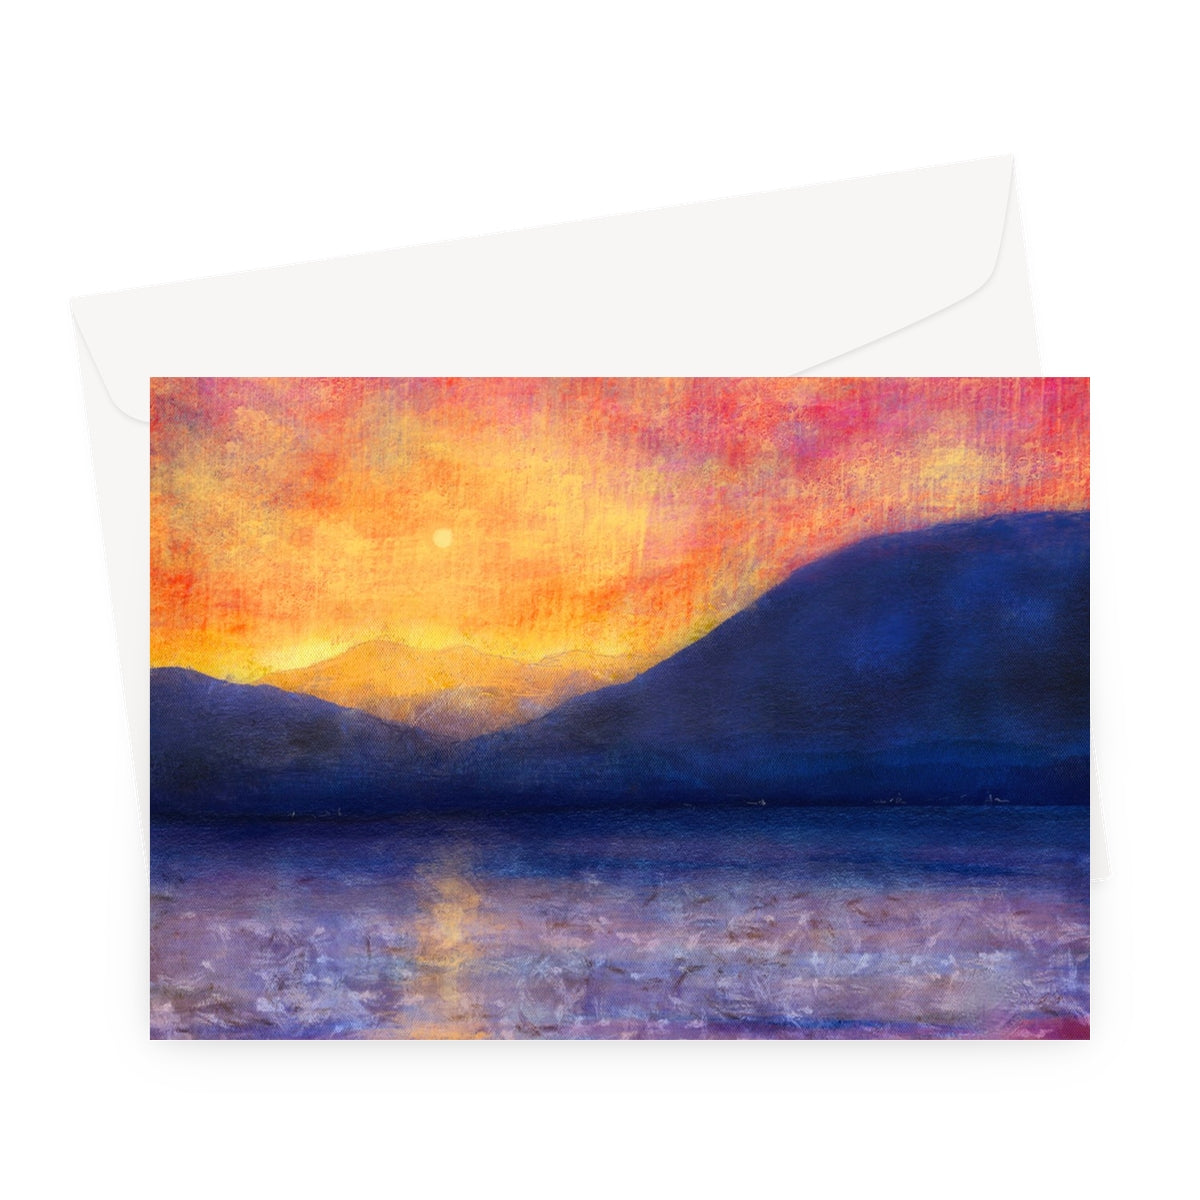 Sunset Approaching Mull Art Gifts Greeting Card-Greetings Cards-Hebridean Islands Art Gallery-A5 Landscape-10 Cards-Paintings, Prints, Homeware, Art Gifts From Scotland By Scottish Artist Kevin Hunter